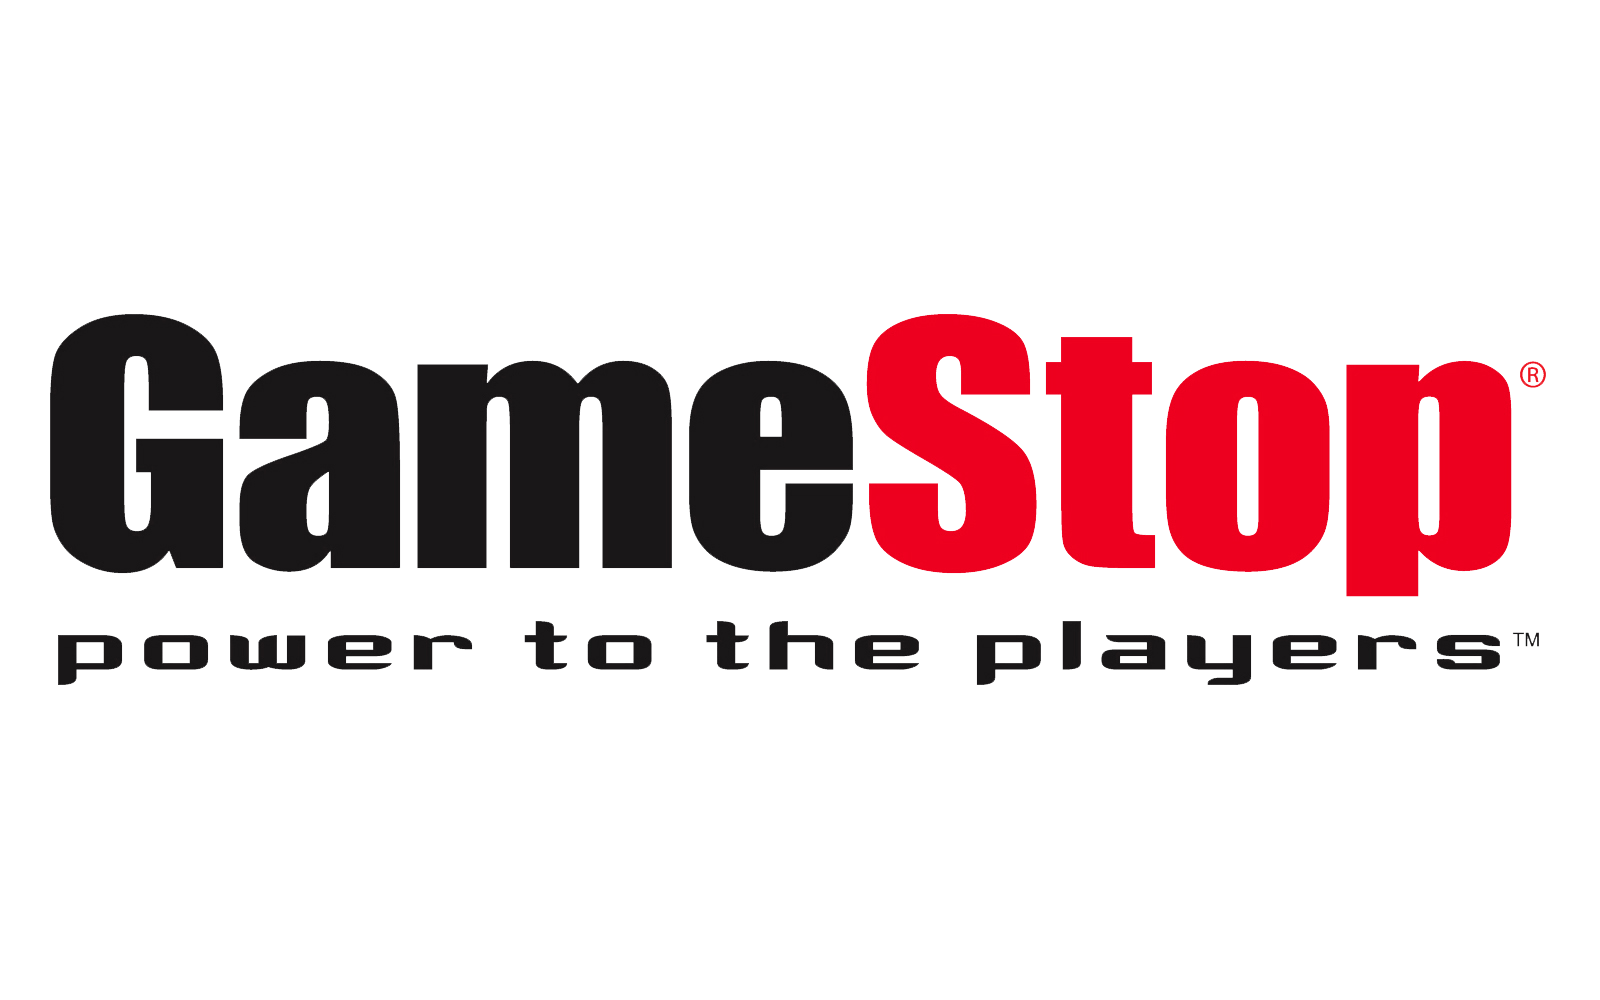 GameStop Logo - GameStop in Talks With Buyout Firms After Drawing Interest - n3rdabl3